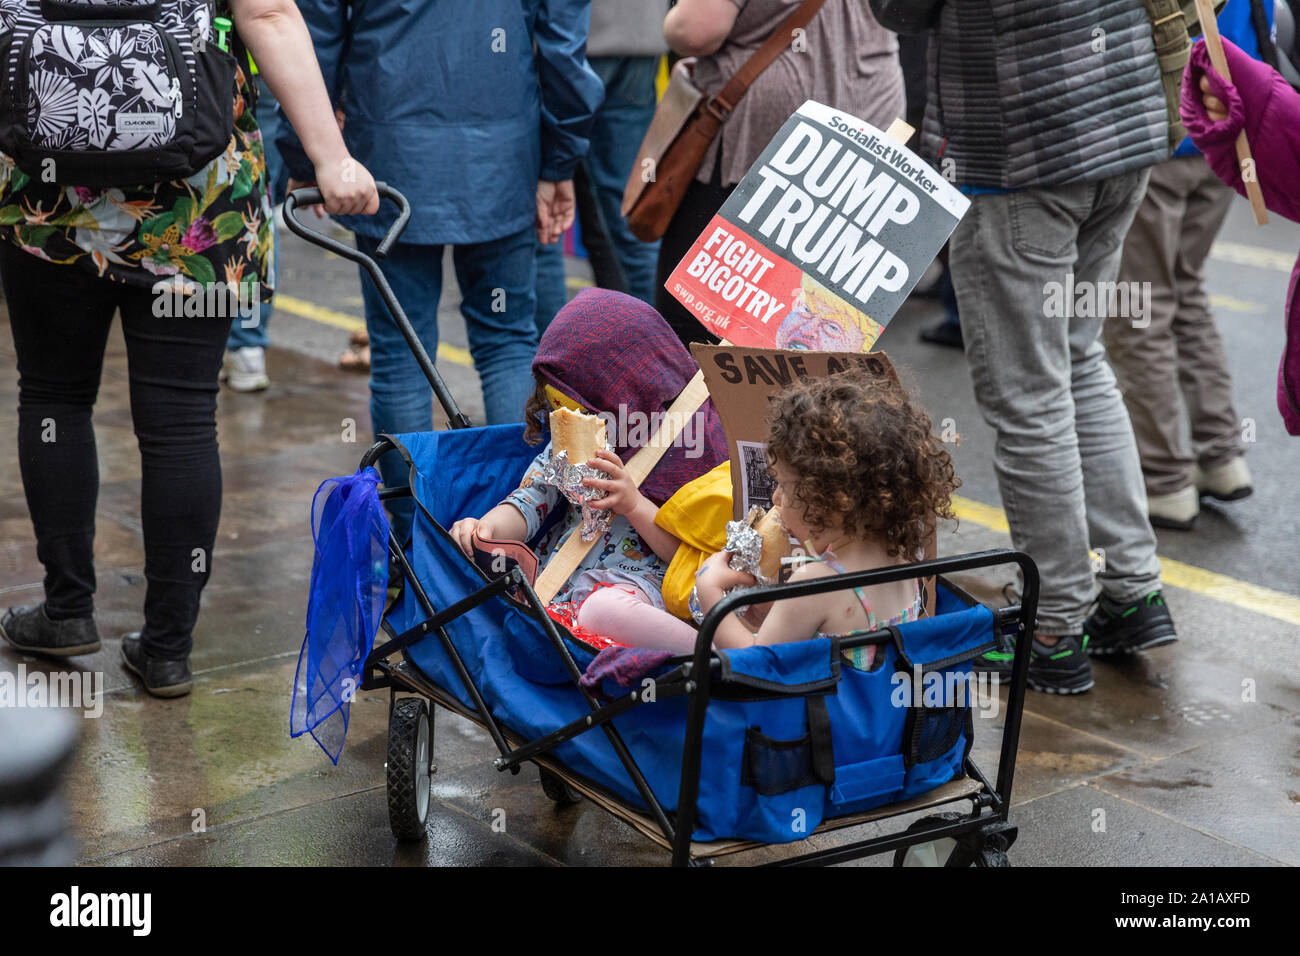 Two young children holding banners during an Anti Trump protest in Central London on June 4th 2019, during President Trump's London visit. Stock Photo